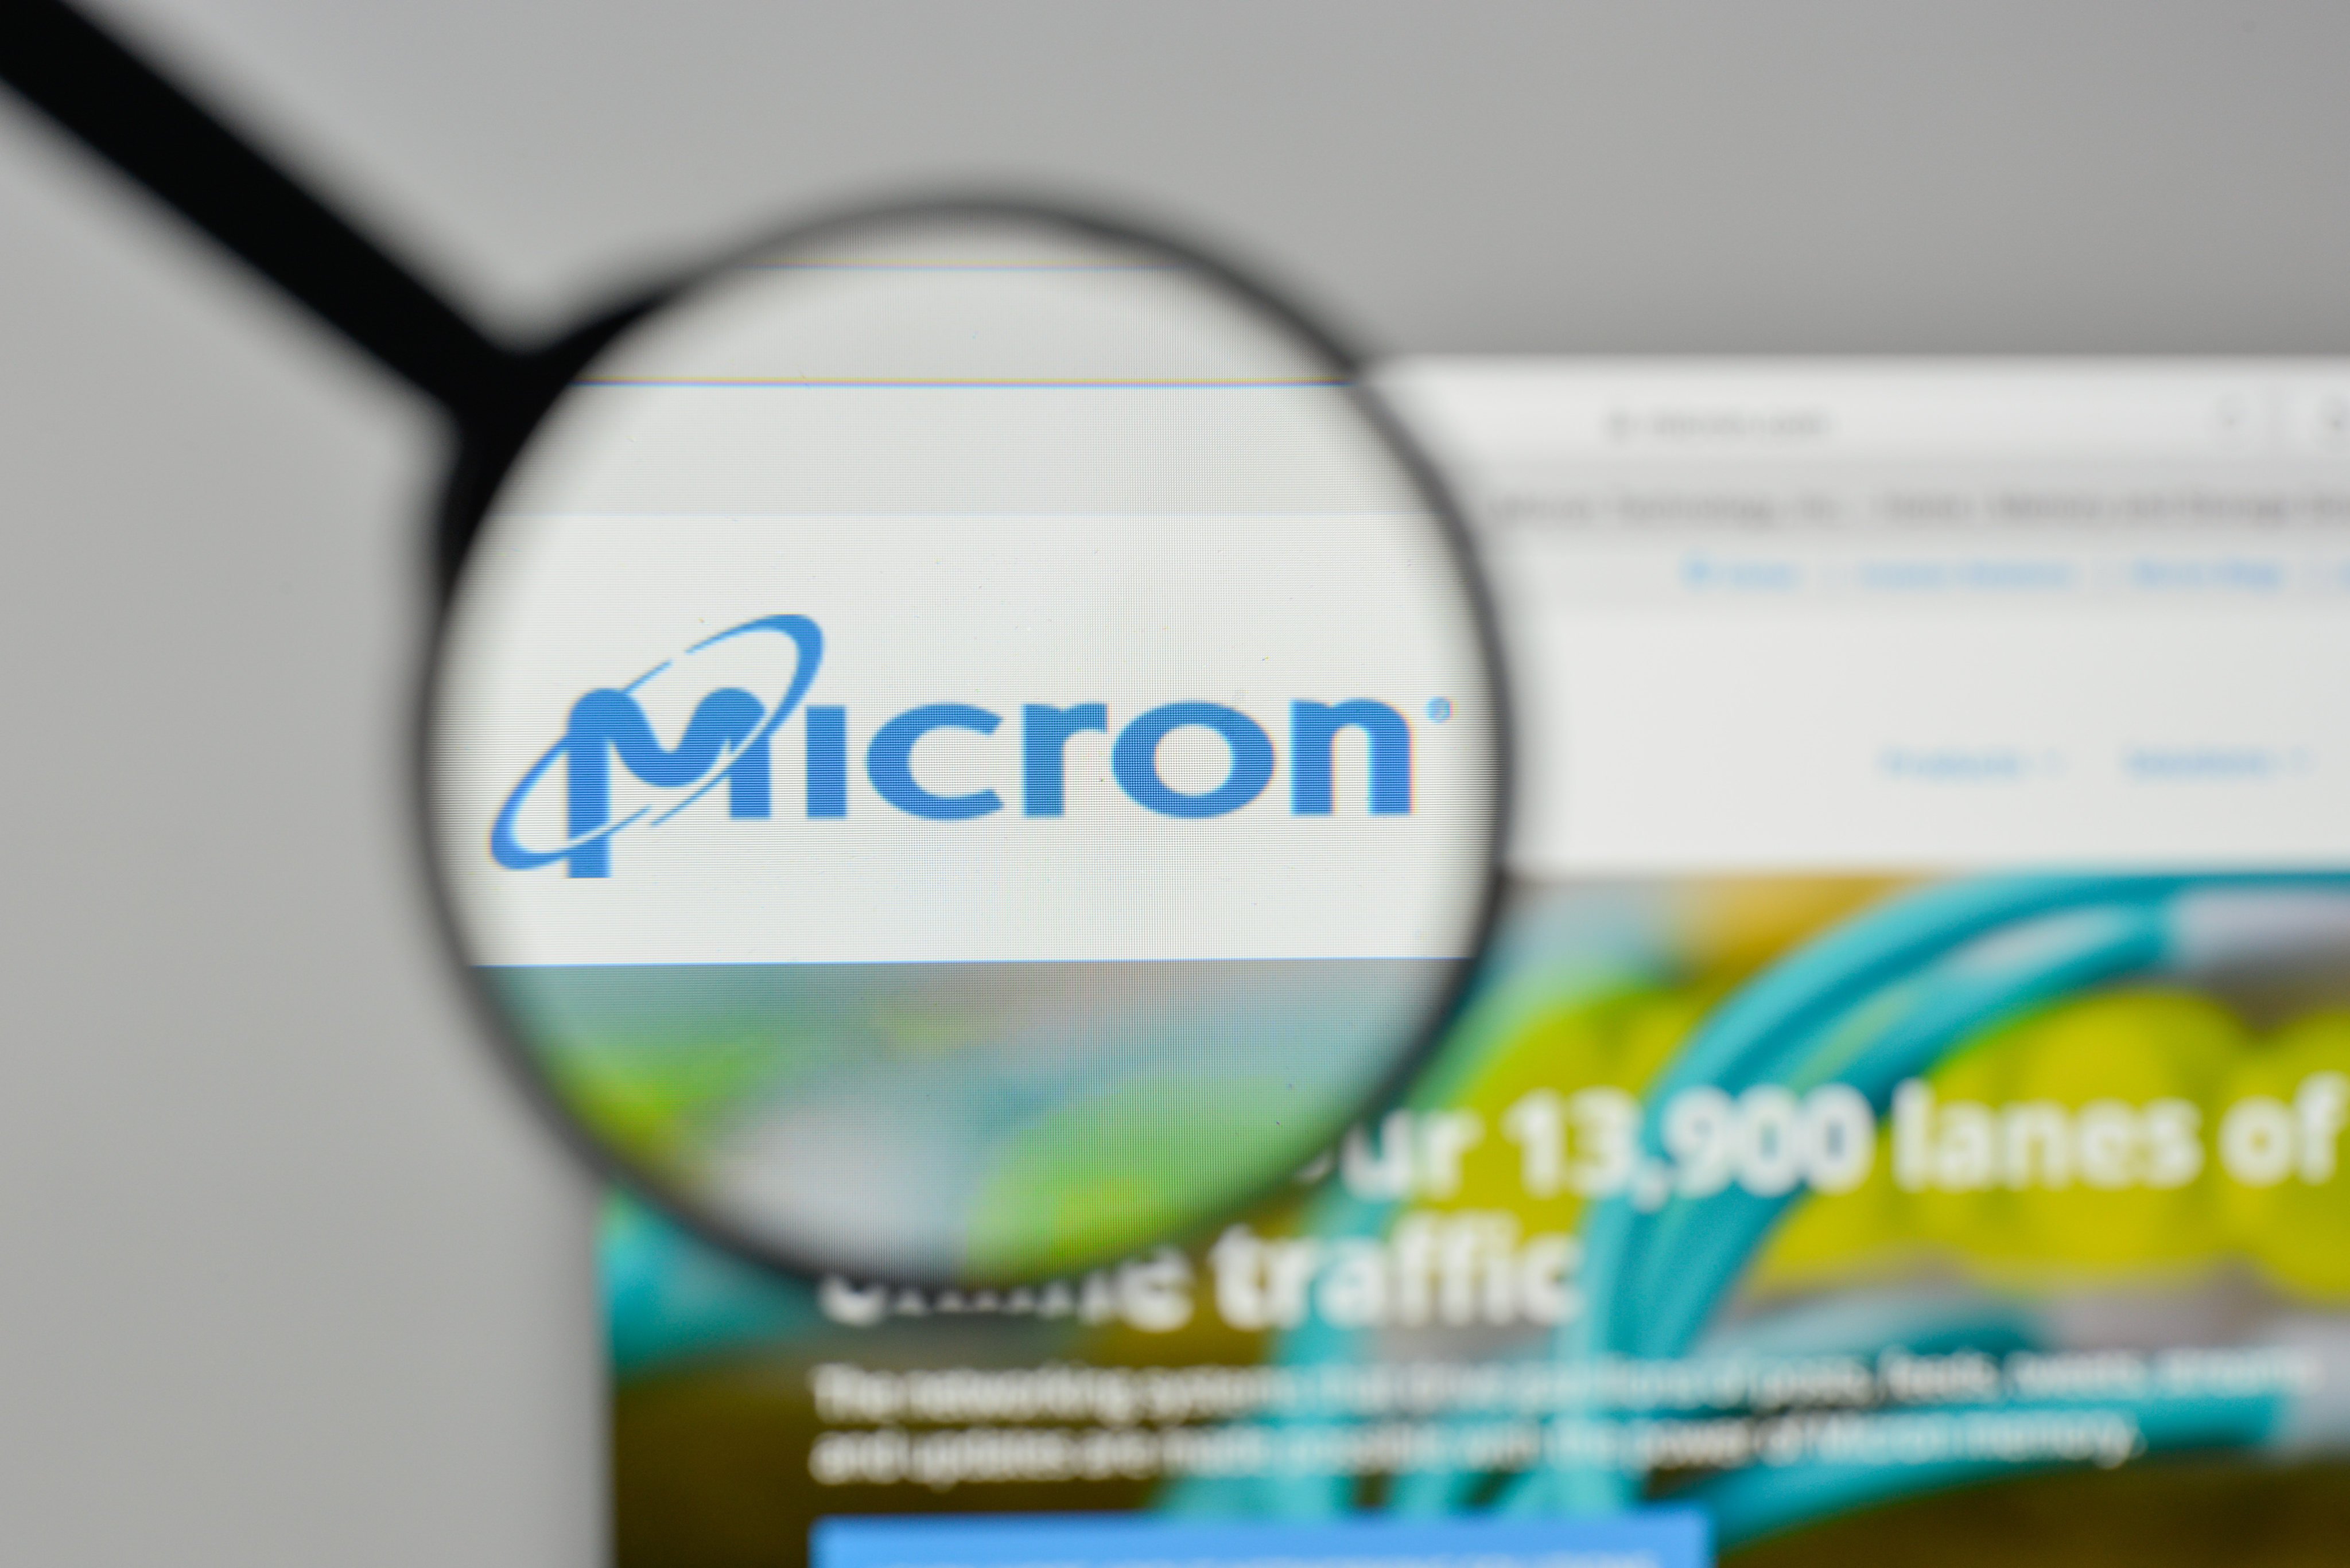 Micron Technology, the United States’ largest memory chip maker, is now under scrutiny in China. Photo: Shutterstock